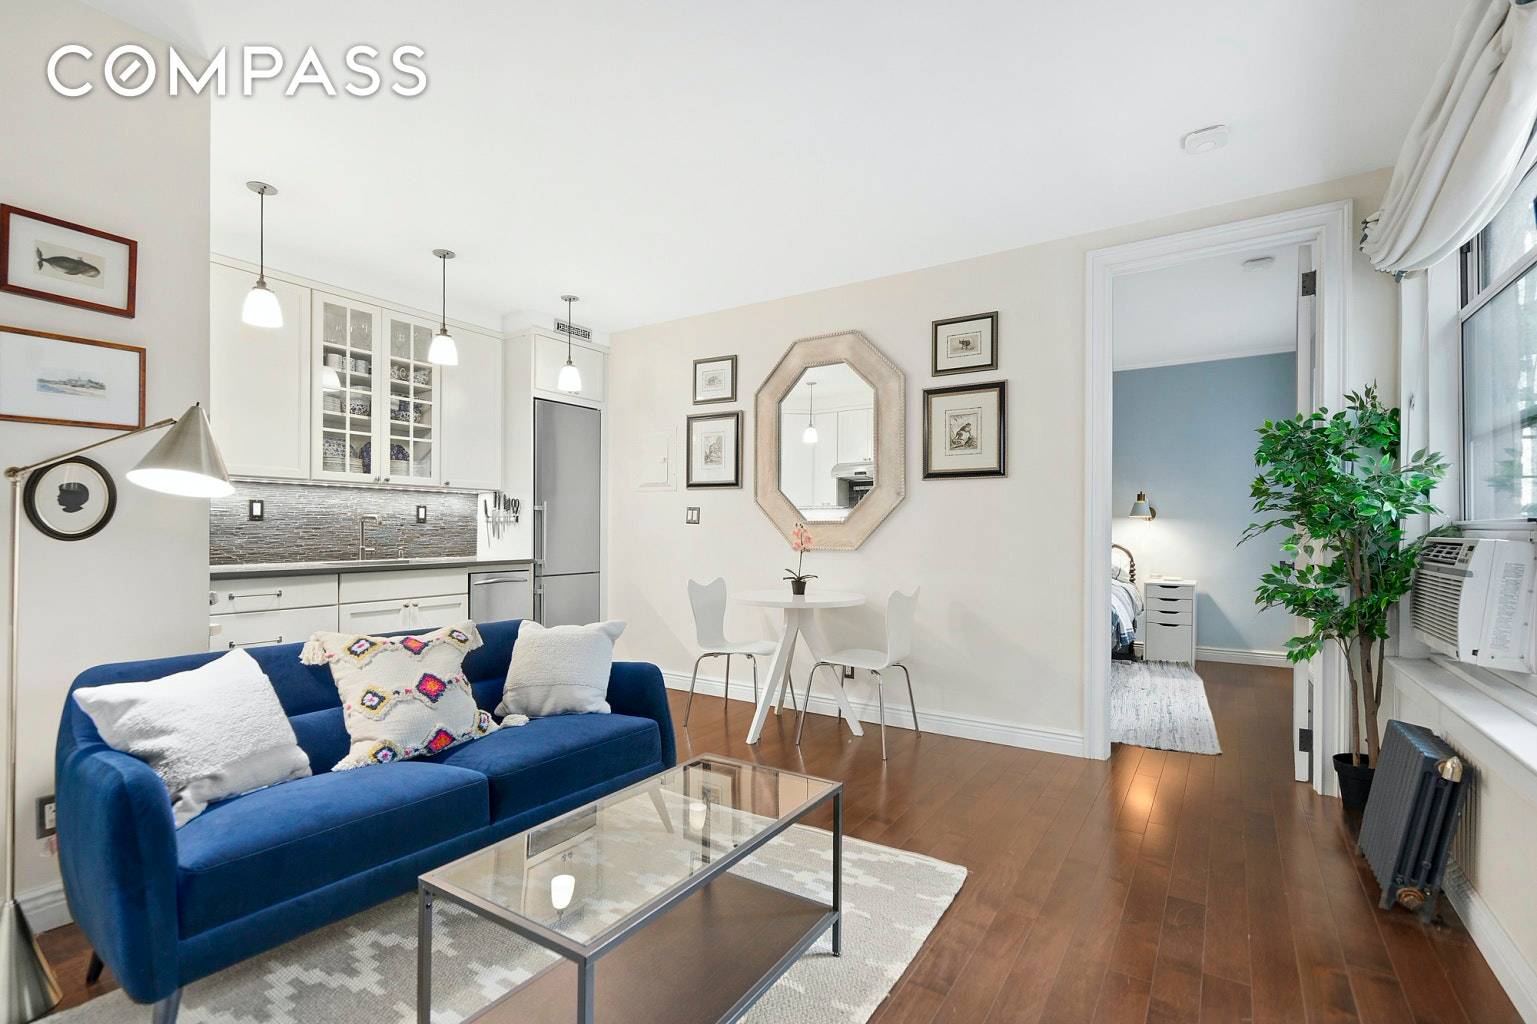 Triple mint, beautifully renovated 1 bedroom co op in the heart of Brooklyn Heights.